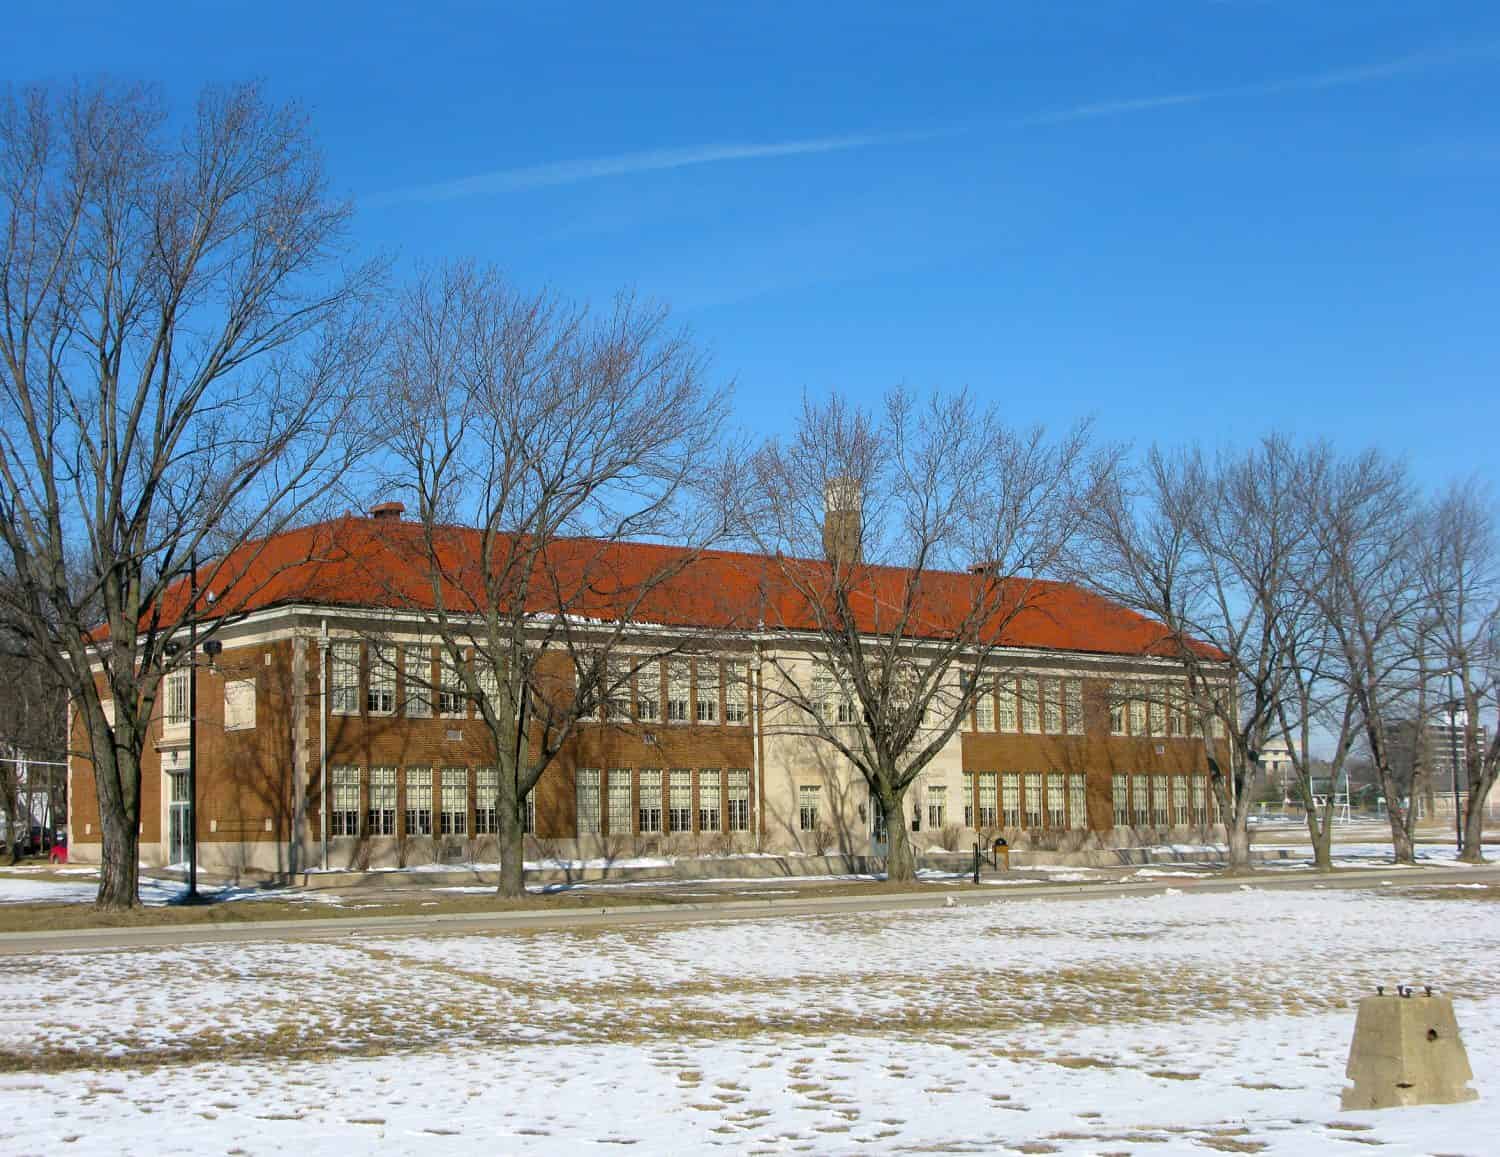 Monroe Elementary School, one of the four former segregated elementary schools for African American children in Topeka, USA which is now part of Brown v. Board of Education National Historic Site